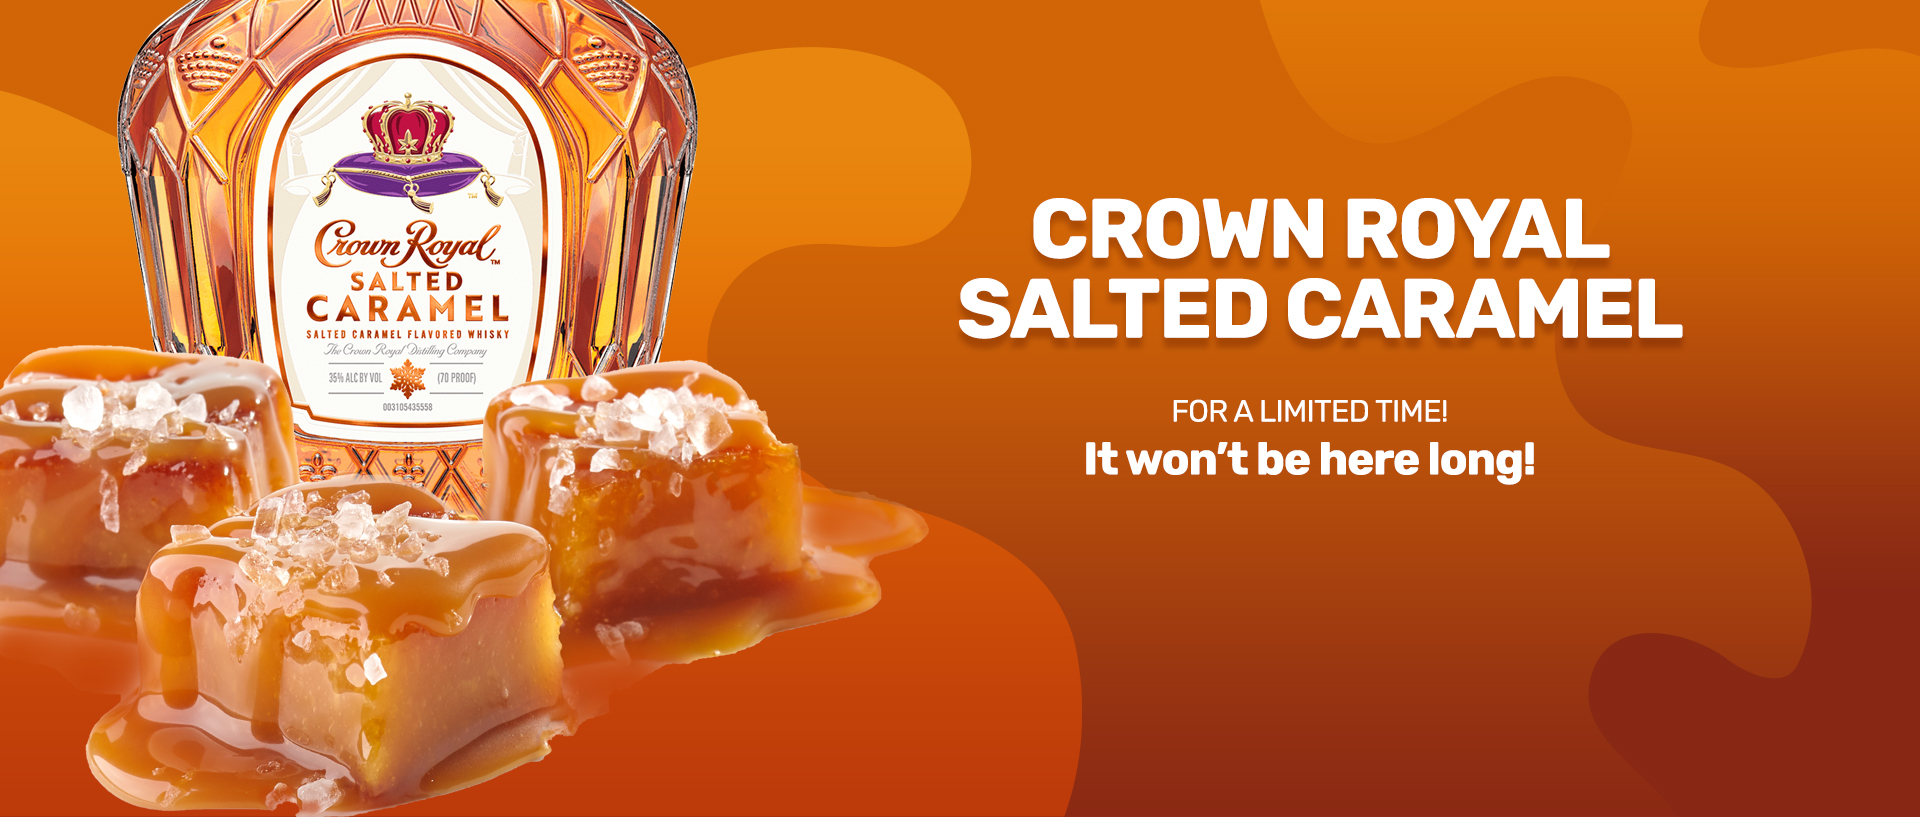 Crown Royal Salted Caramel Whiskey for a limited time at Lundeen's